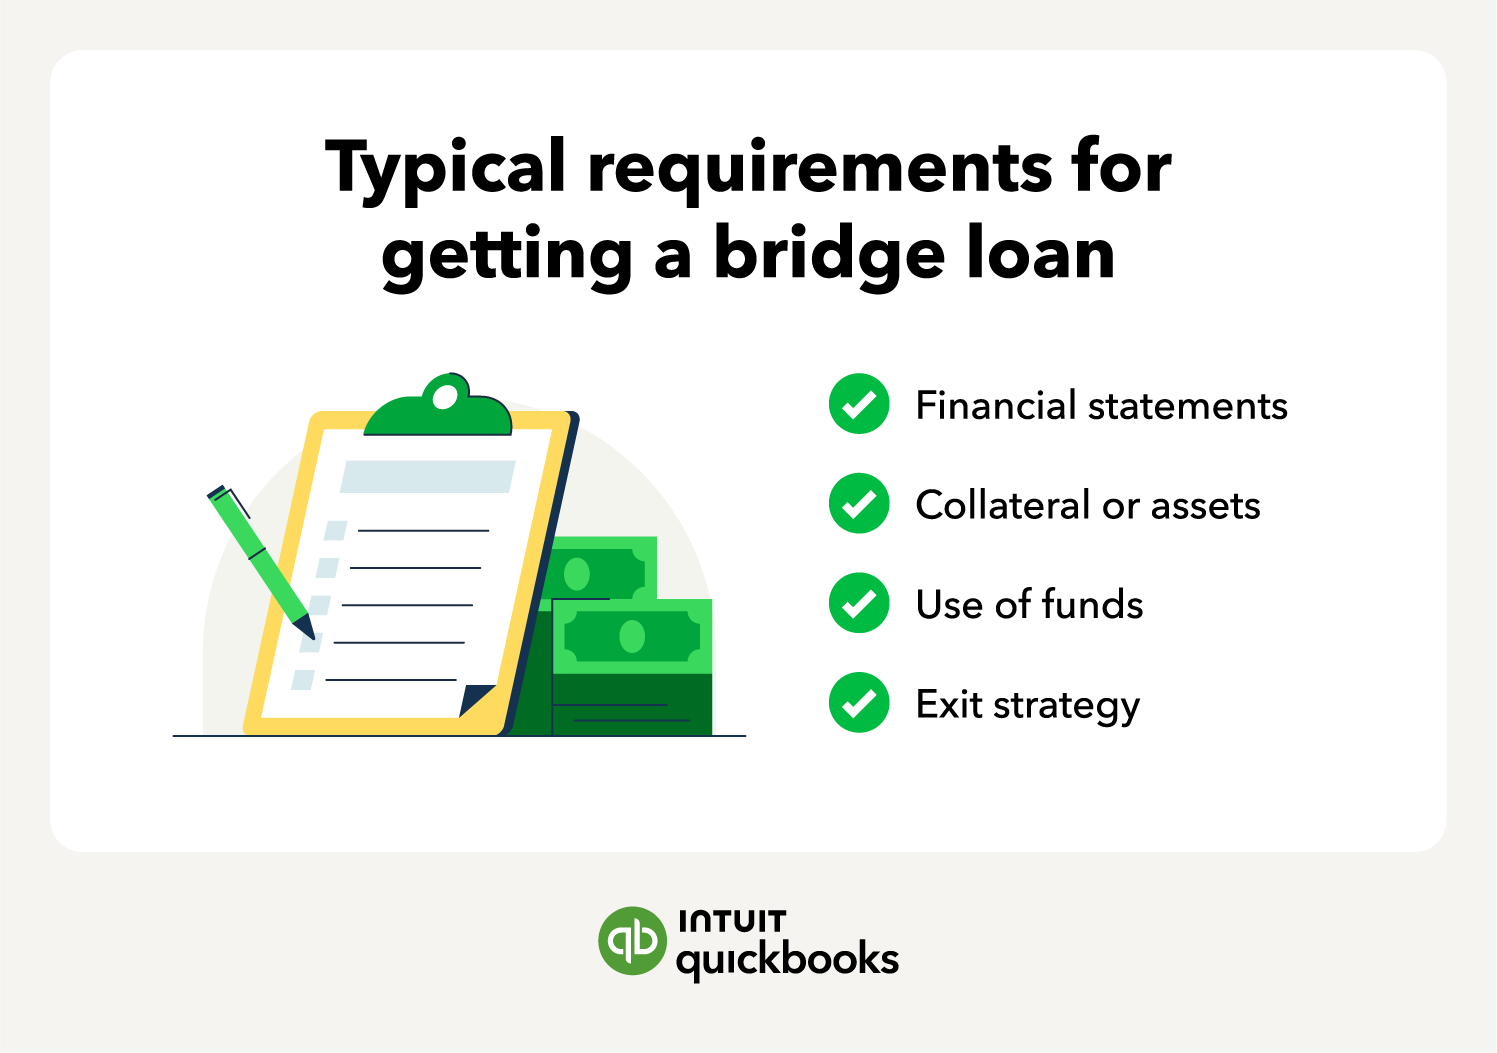 An illustration of the typical requirements for getting a bridge loan, such as financial statements and an exit strategy.